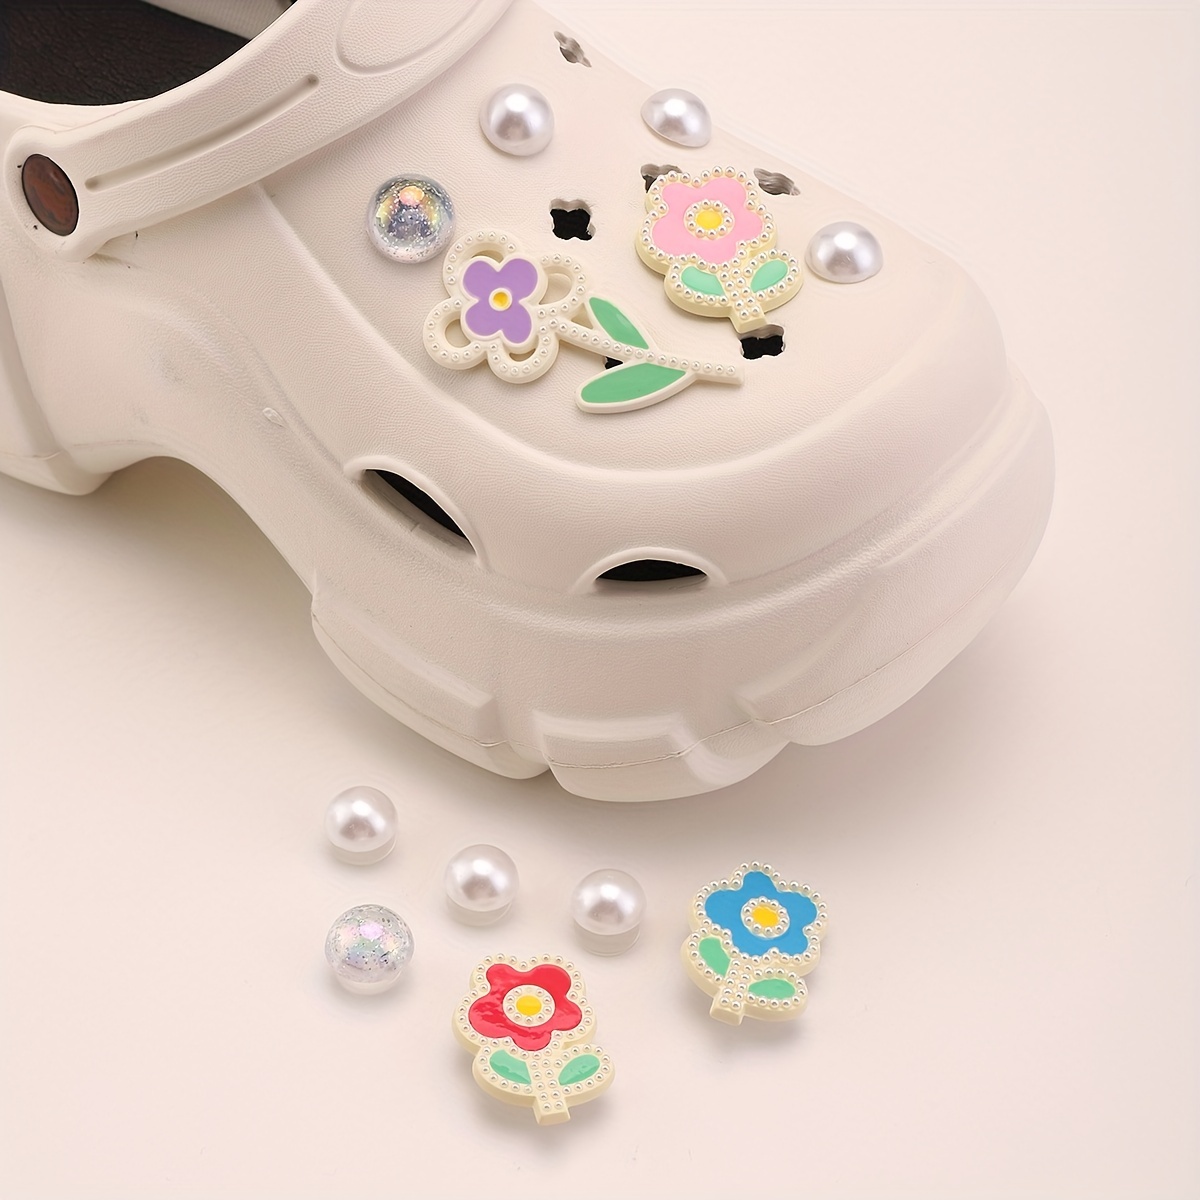 14pcs/set Acrylic Material Perforated Flower & Daisy Bow Shoe Charms